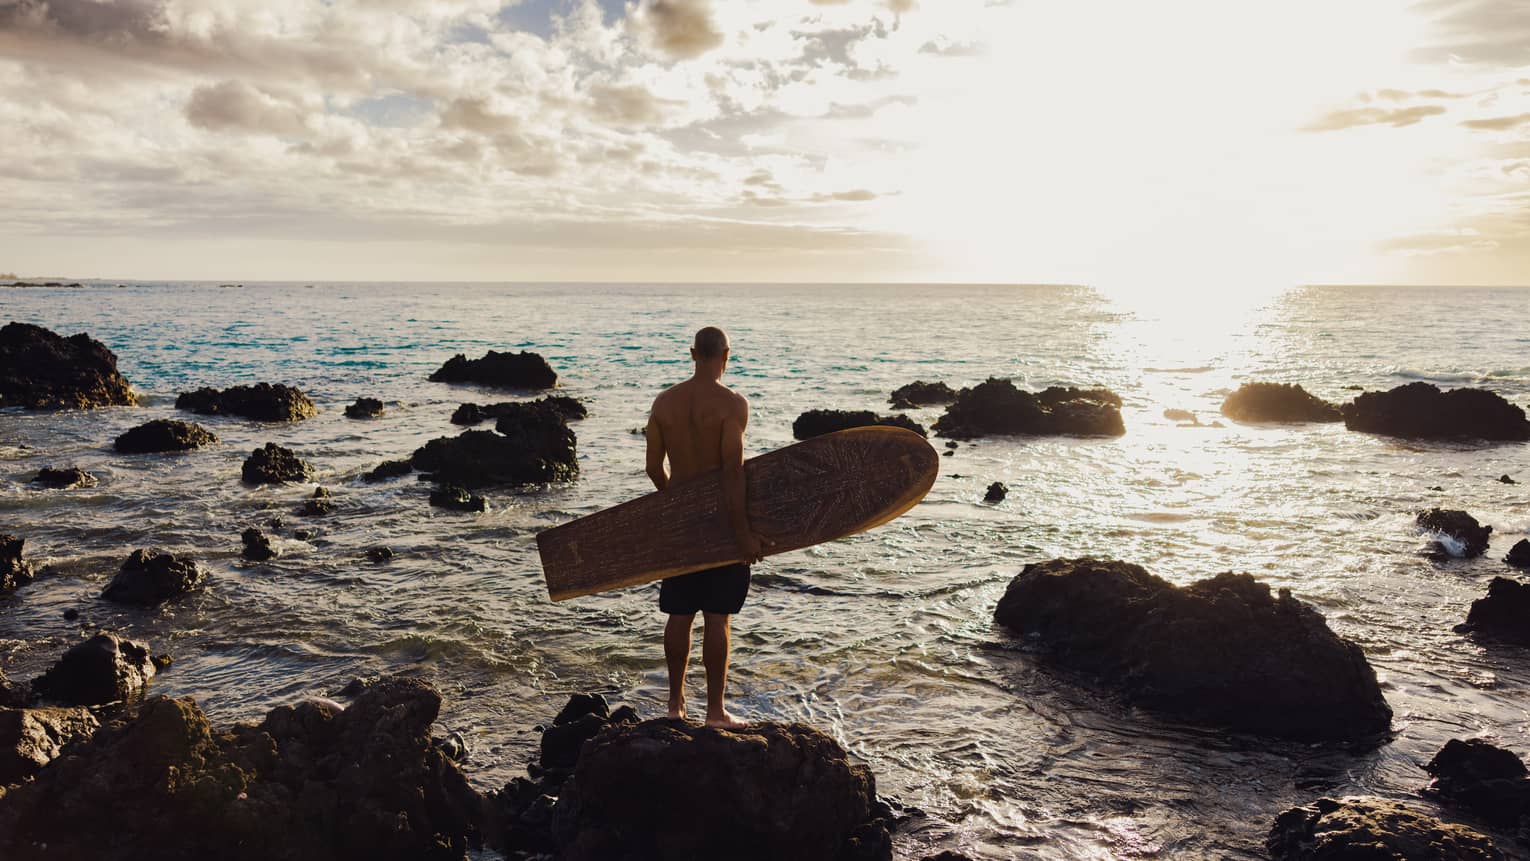 Surfboard designer Bonga Perkins stands on craggy beach at sunset with wooden surfboard